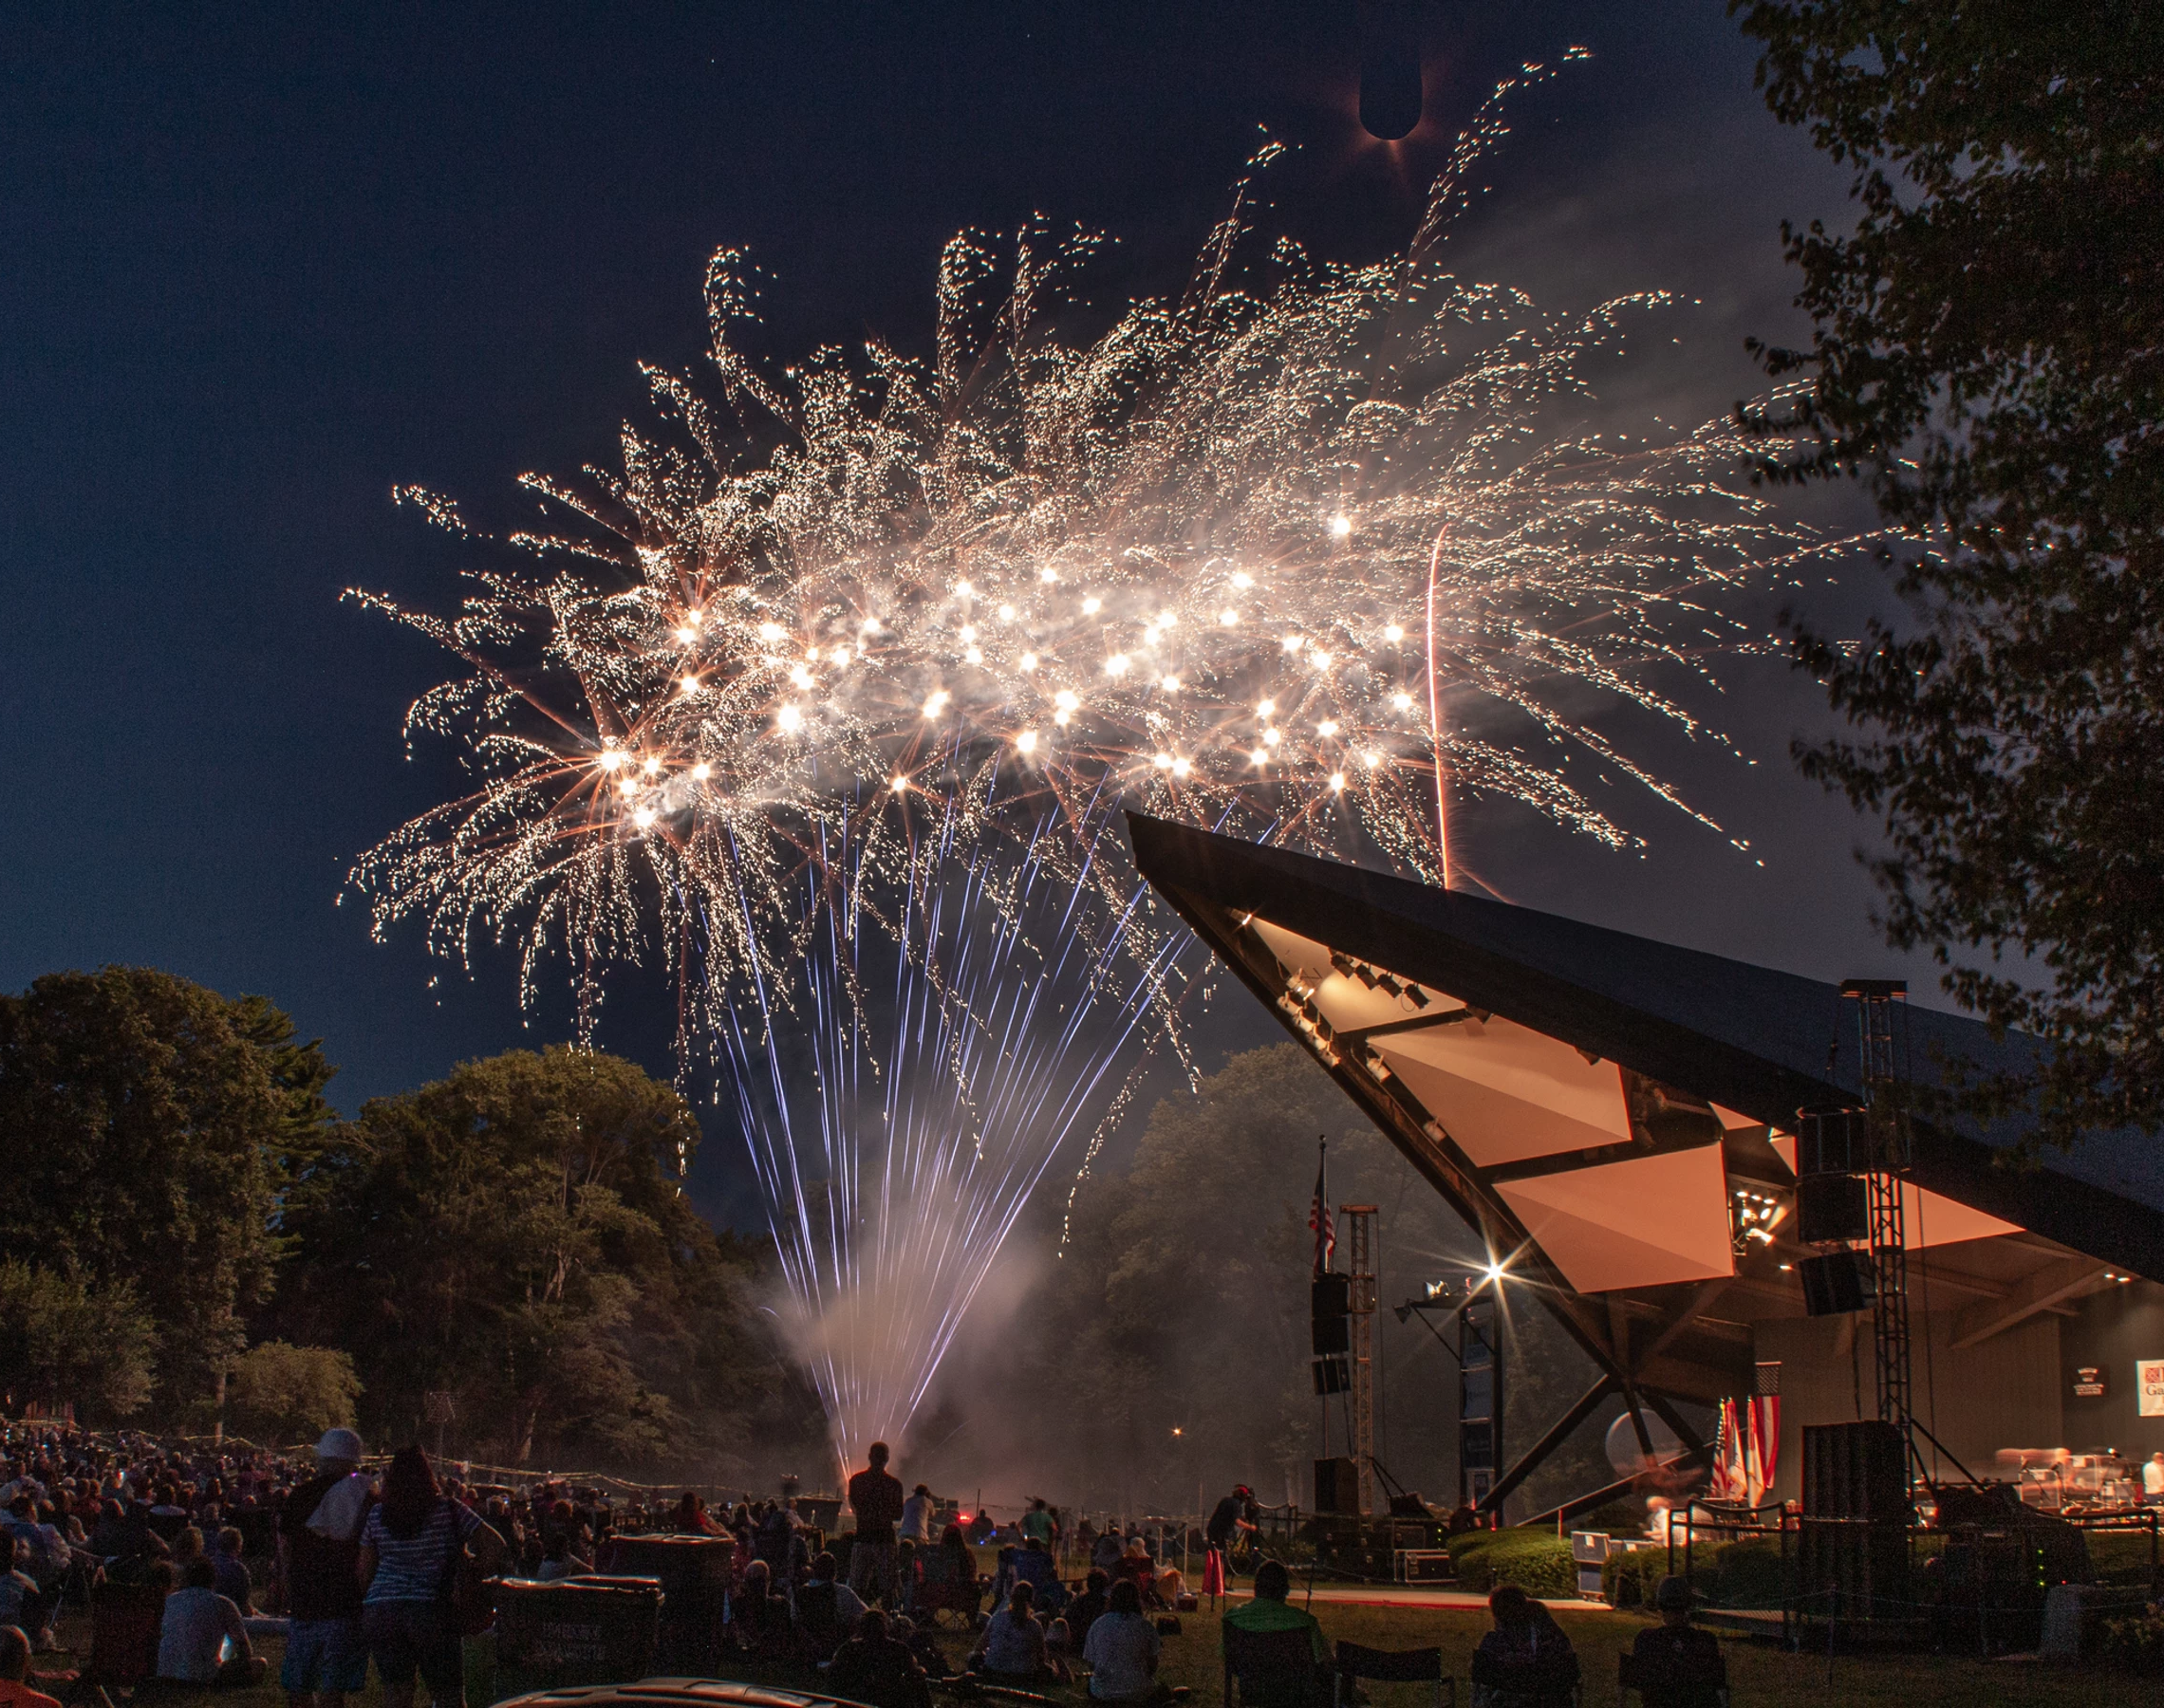 Longs Park Amphitheater Foundation Fireworks Photo by Jim Goudie